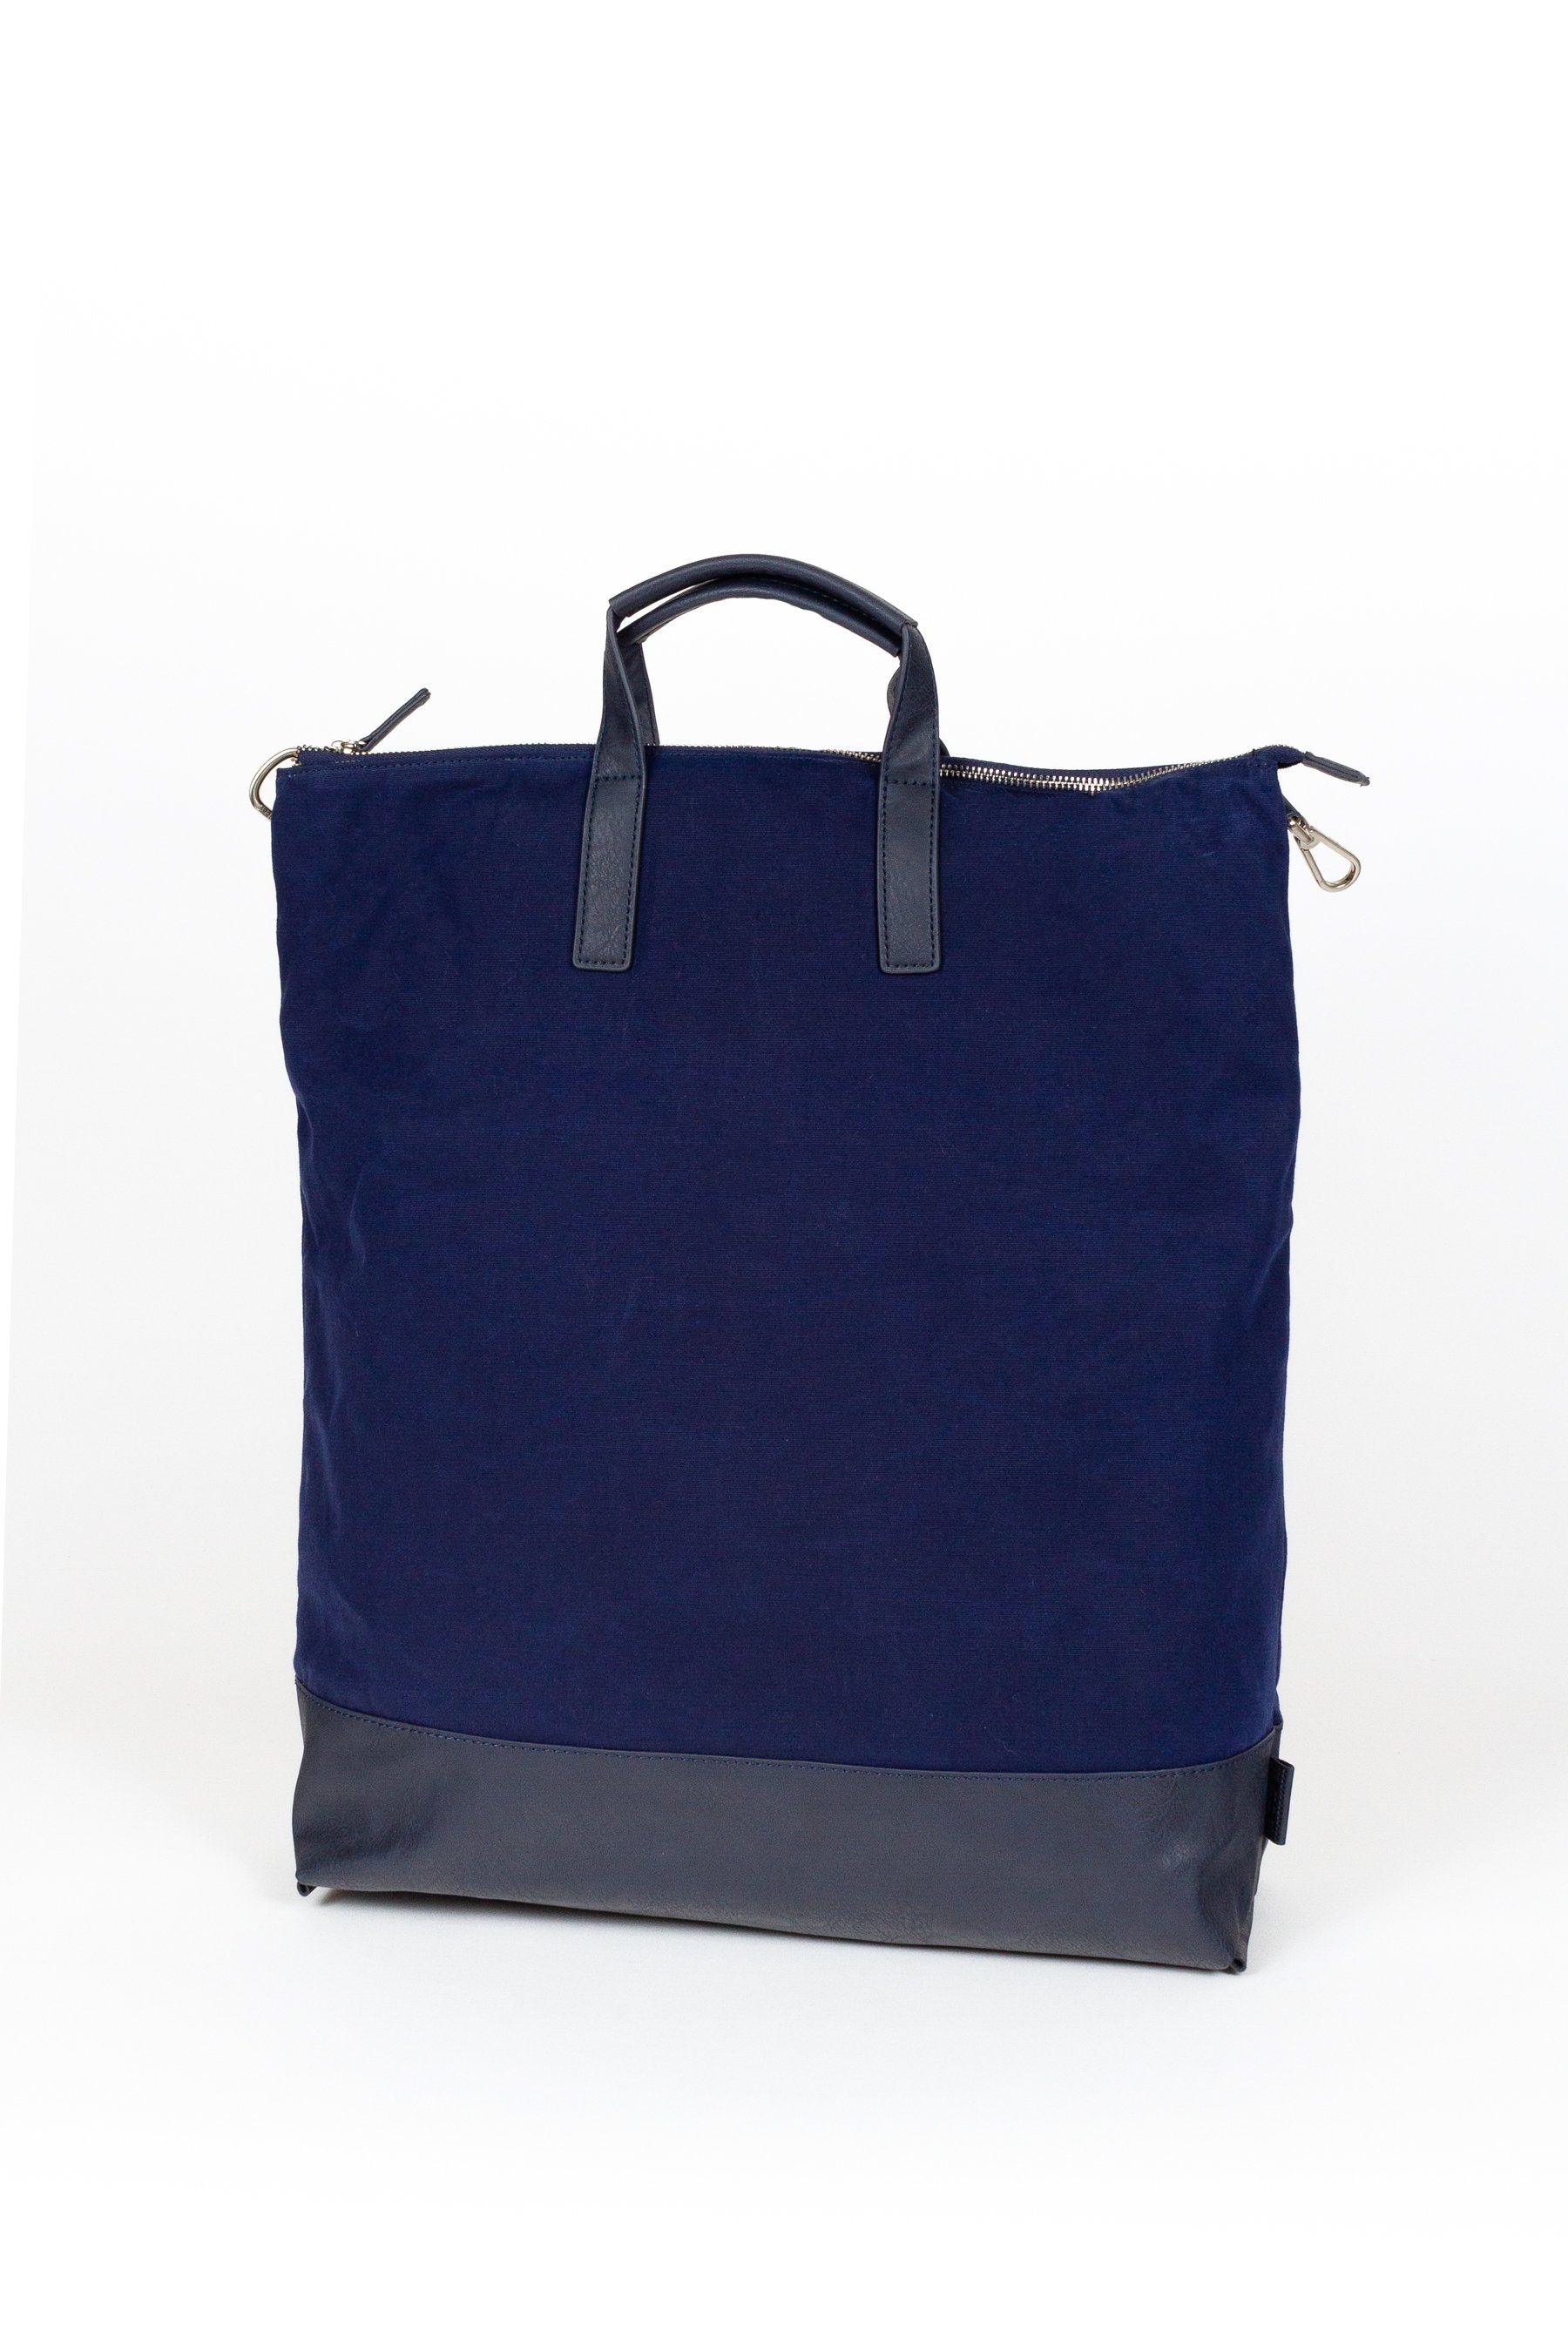 BEON.COM.AU Buy the Goteborg X-Change Bag in Large Navy by Jost Bags Jost at BEON.COM.AU